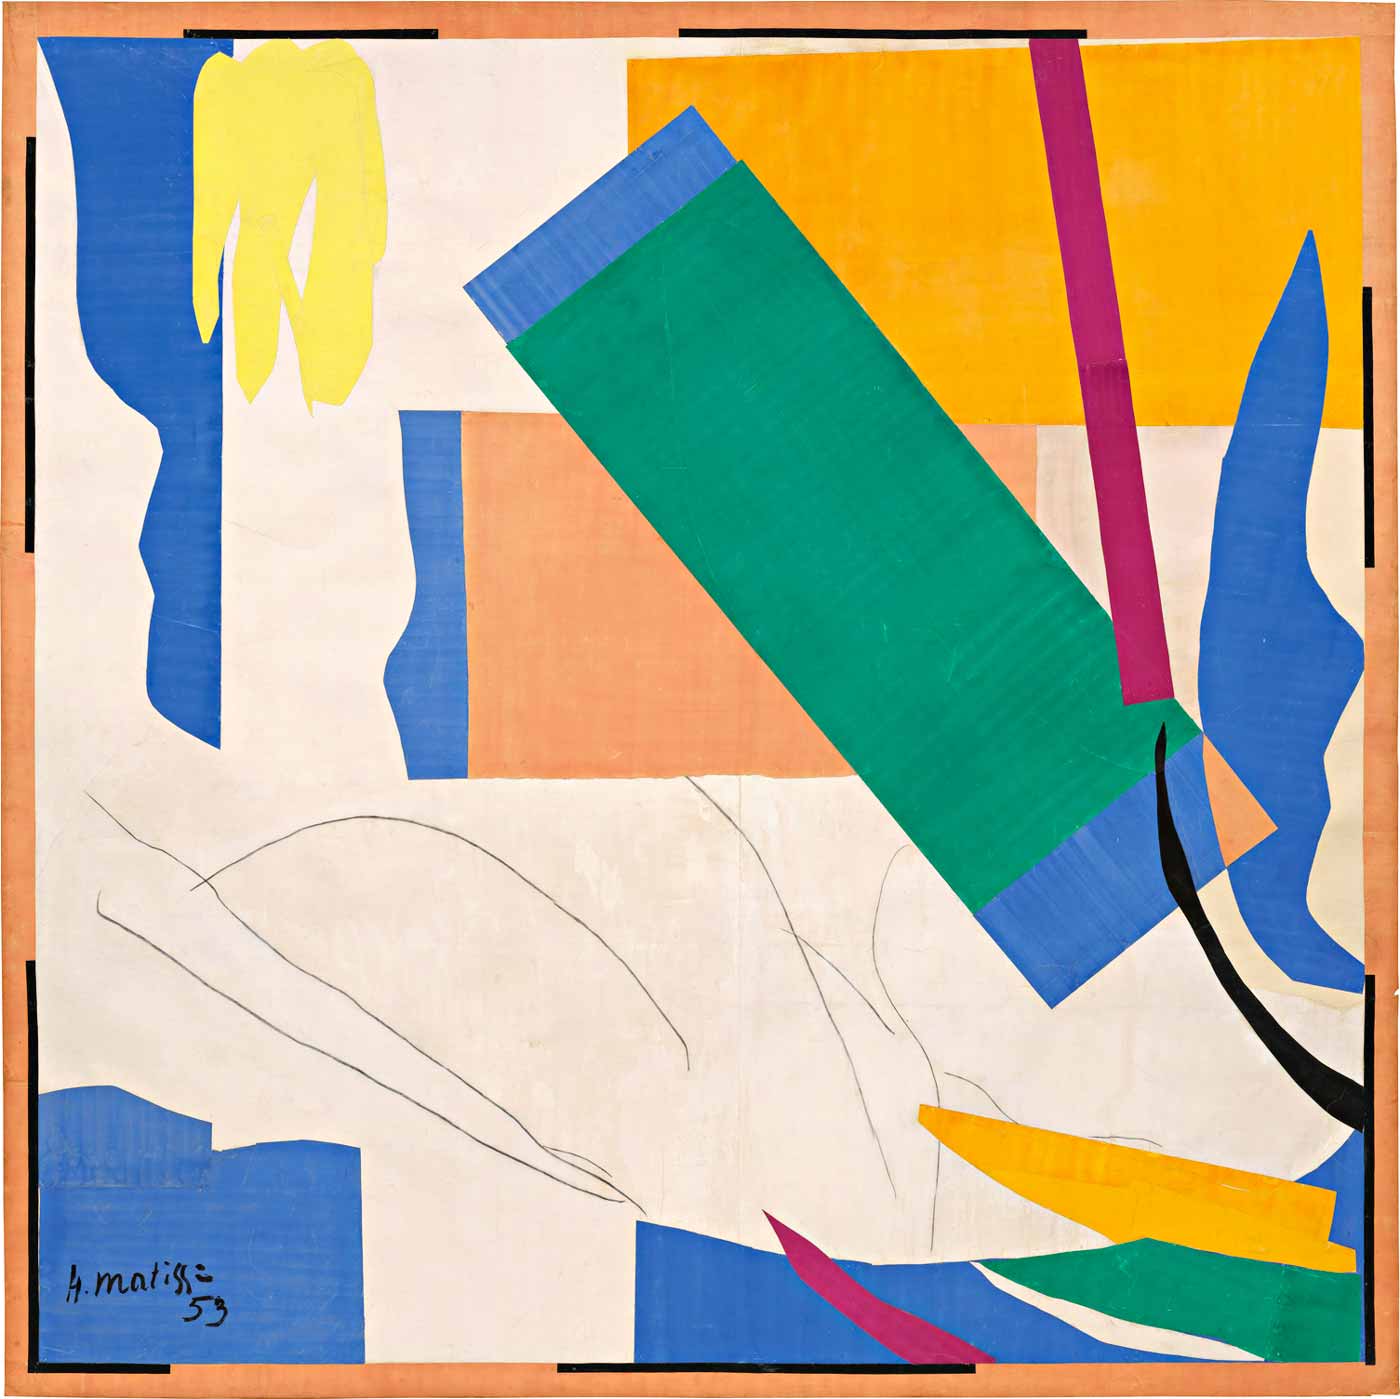 Memory of Oceania,
                      1952–53 (Memory of Oceania, Summer 1952–Early 1953: Henri Matisse—The Museum of Modern Art, Mrs. Simon Guggenheim Fund, © 2014 Succession H. Matisse, Artists Rights Society)